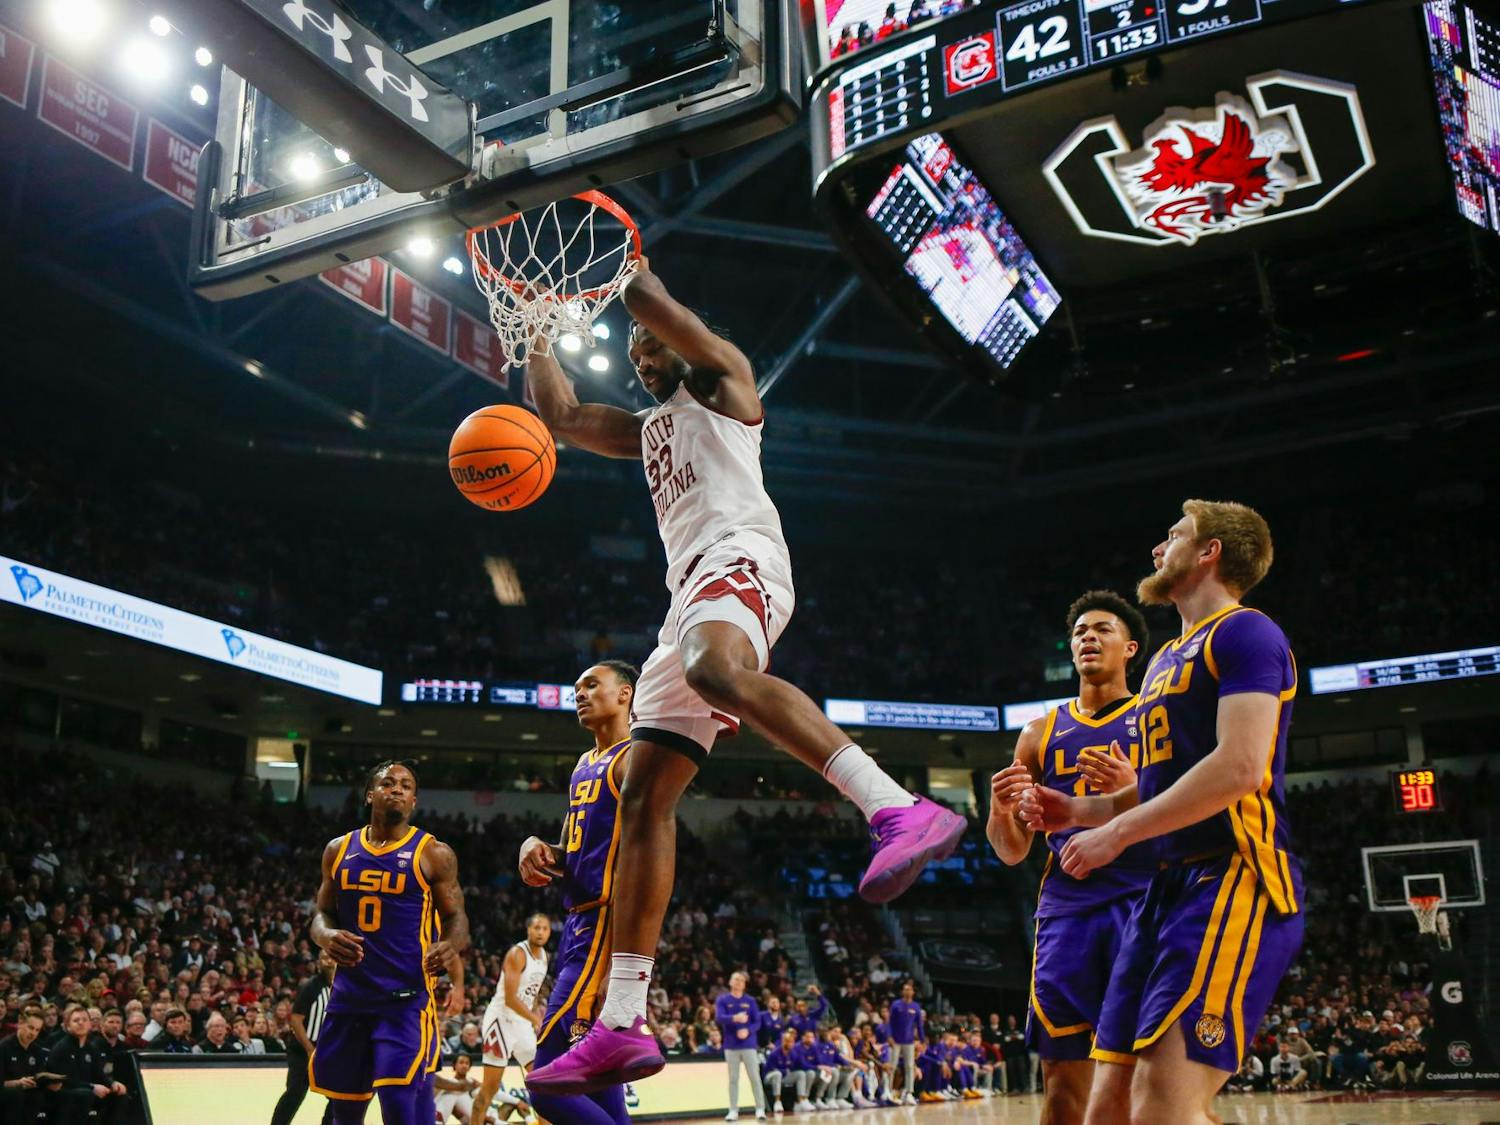 FILE — Senior forward Josh Gray hangs on the rim of the basket during South Carolina’s game against LSU at Colonial Life Arena on Feb. 17, 2024. Gray scored 4 points in the Gamecocks' 64-63 loss to the Tigers.